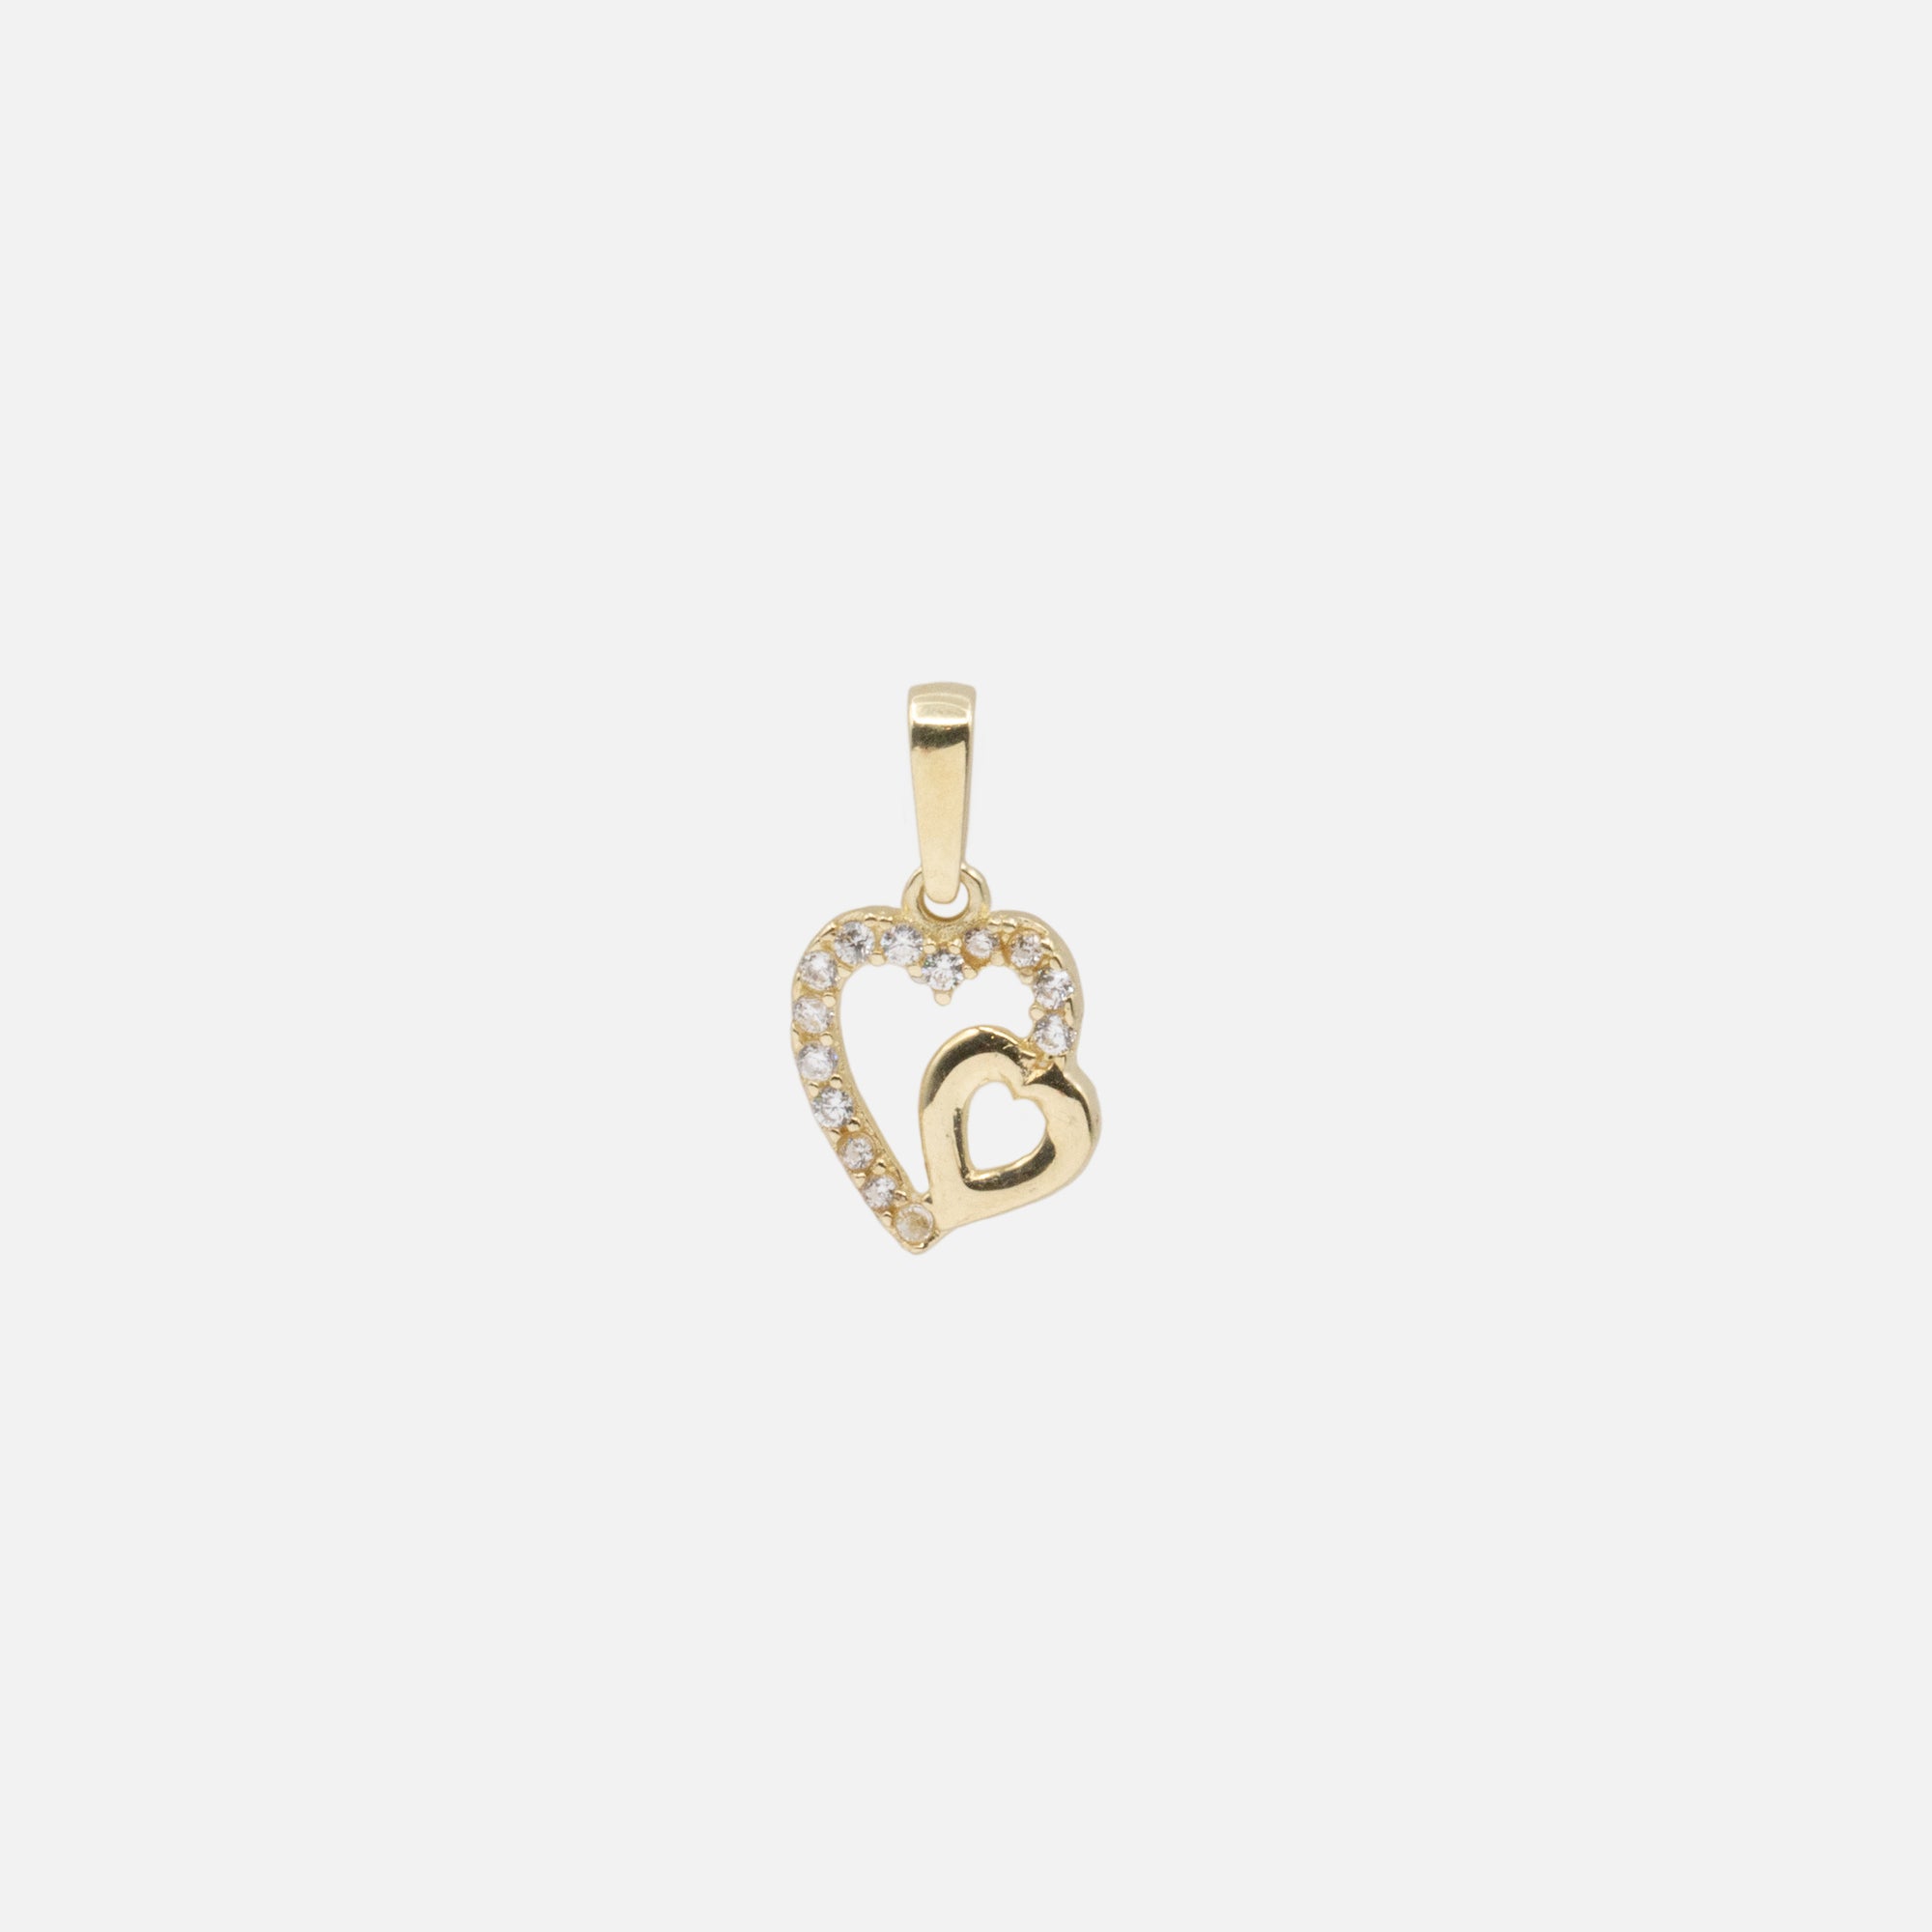 Capsized Heart Charm with Cubic Zirconia in 10k Gold